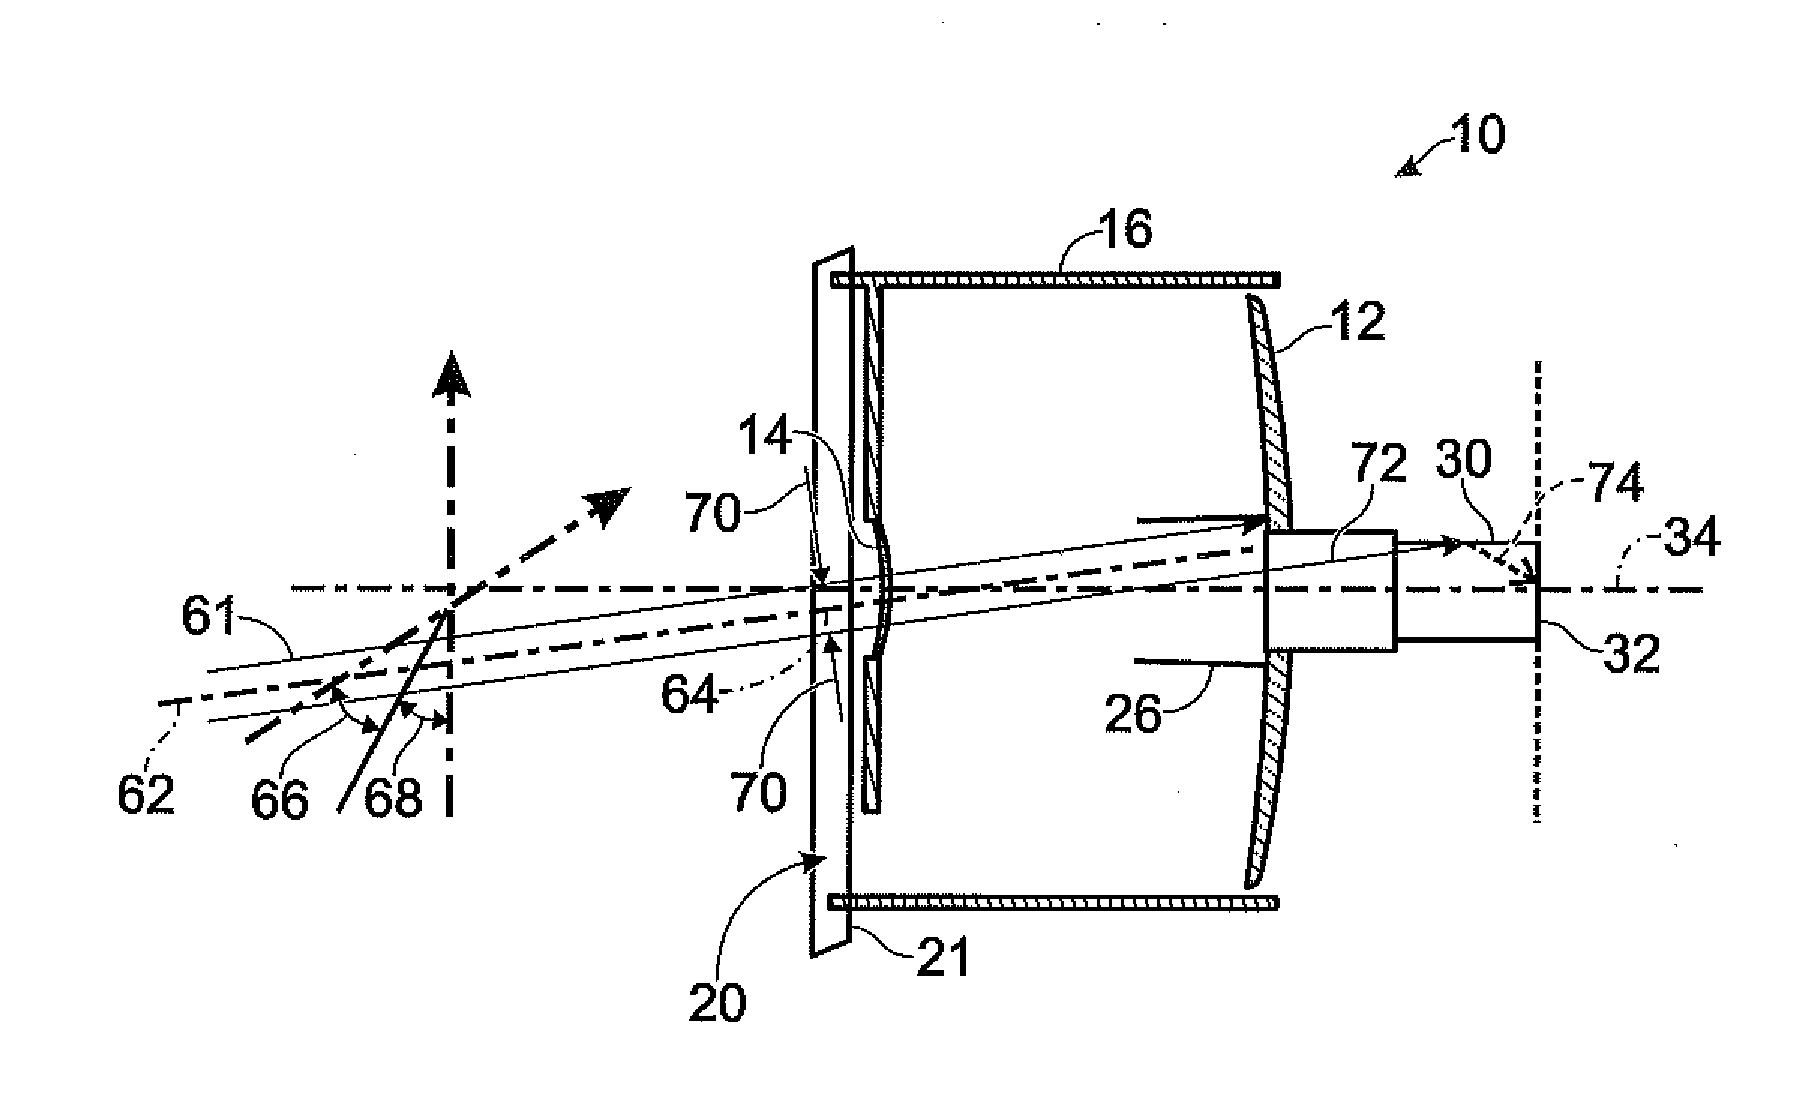 Device and Method for Subaperture Stray Light Detection and Diagnosis